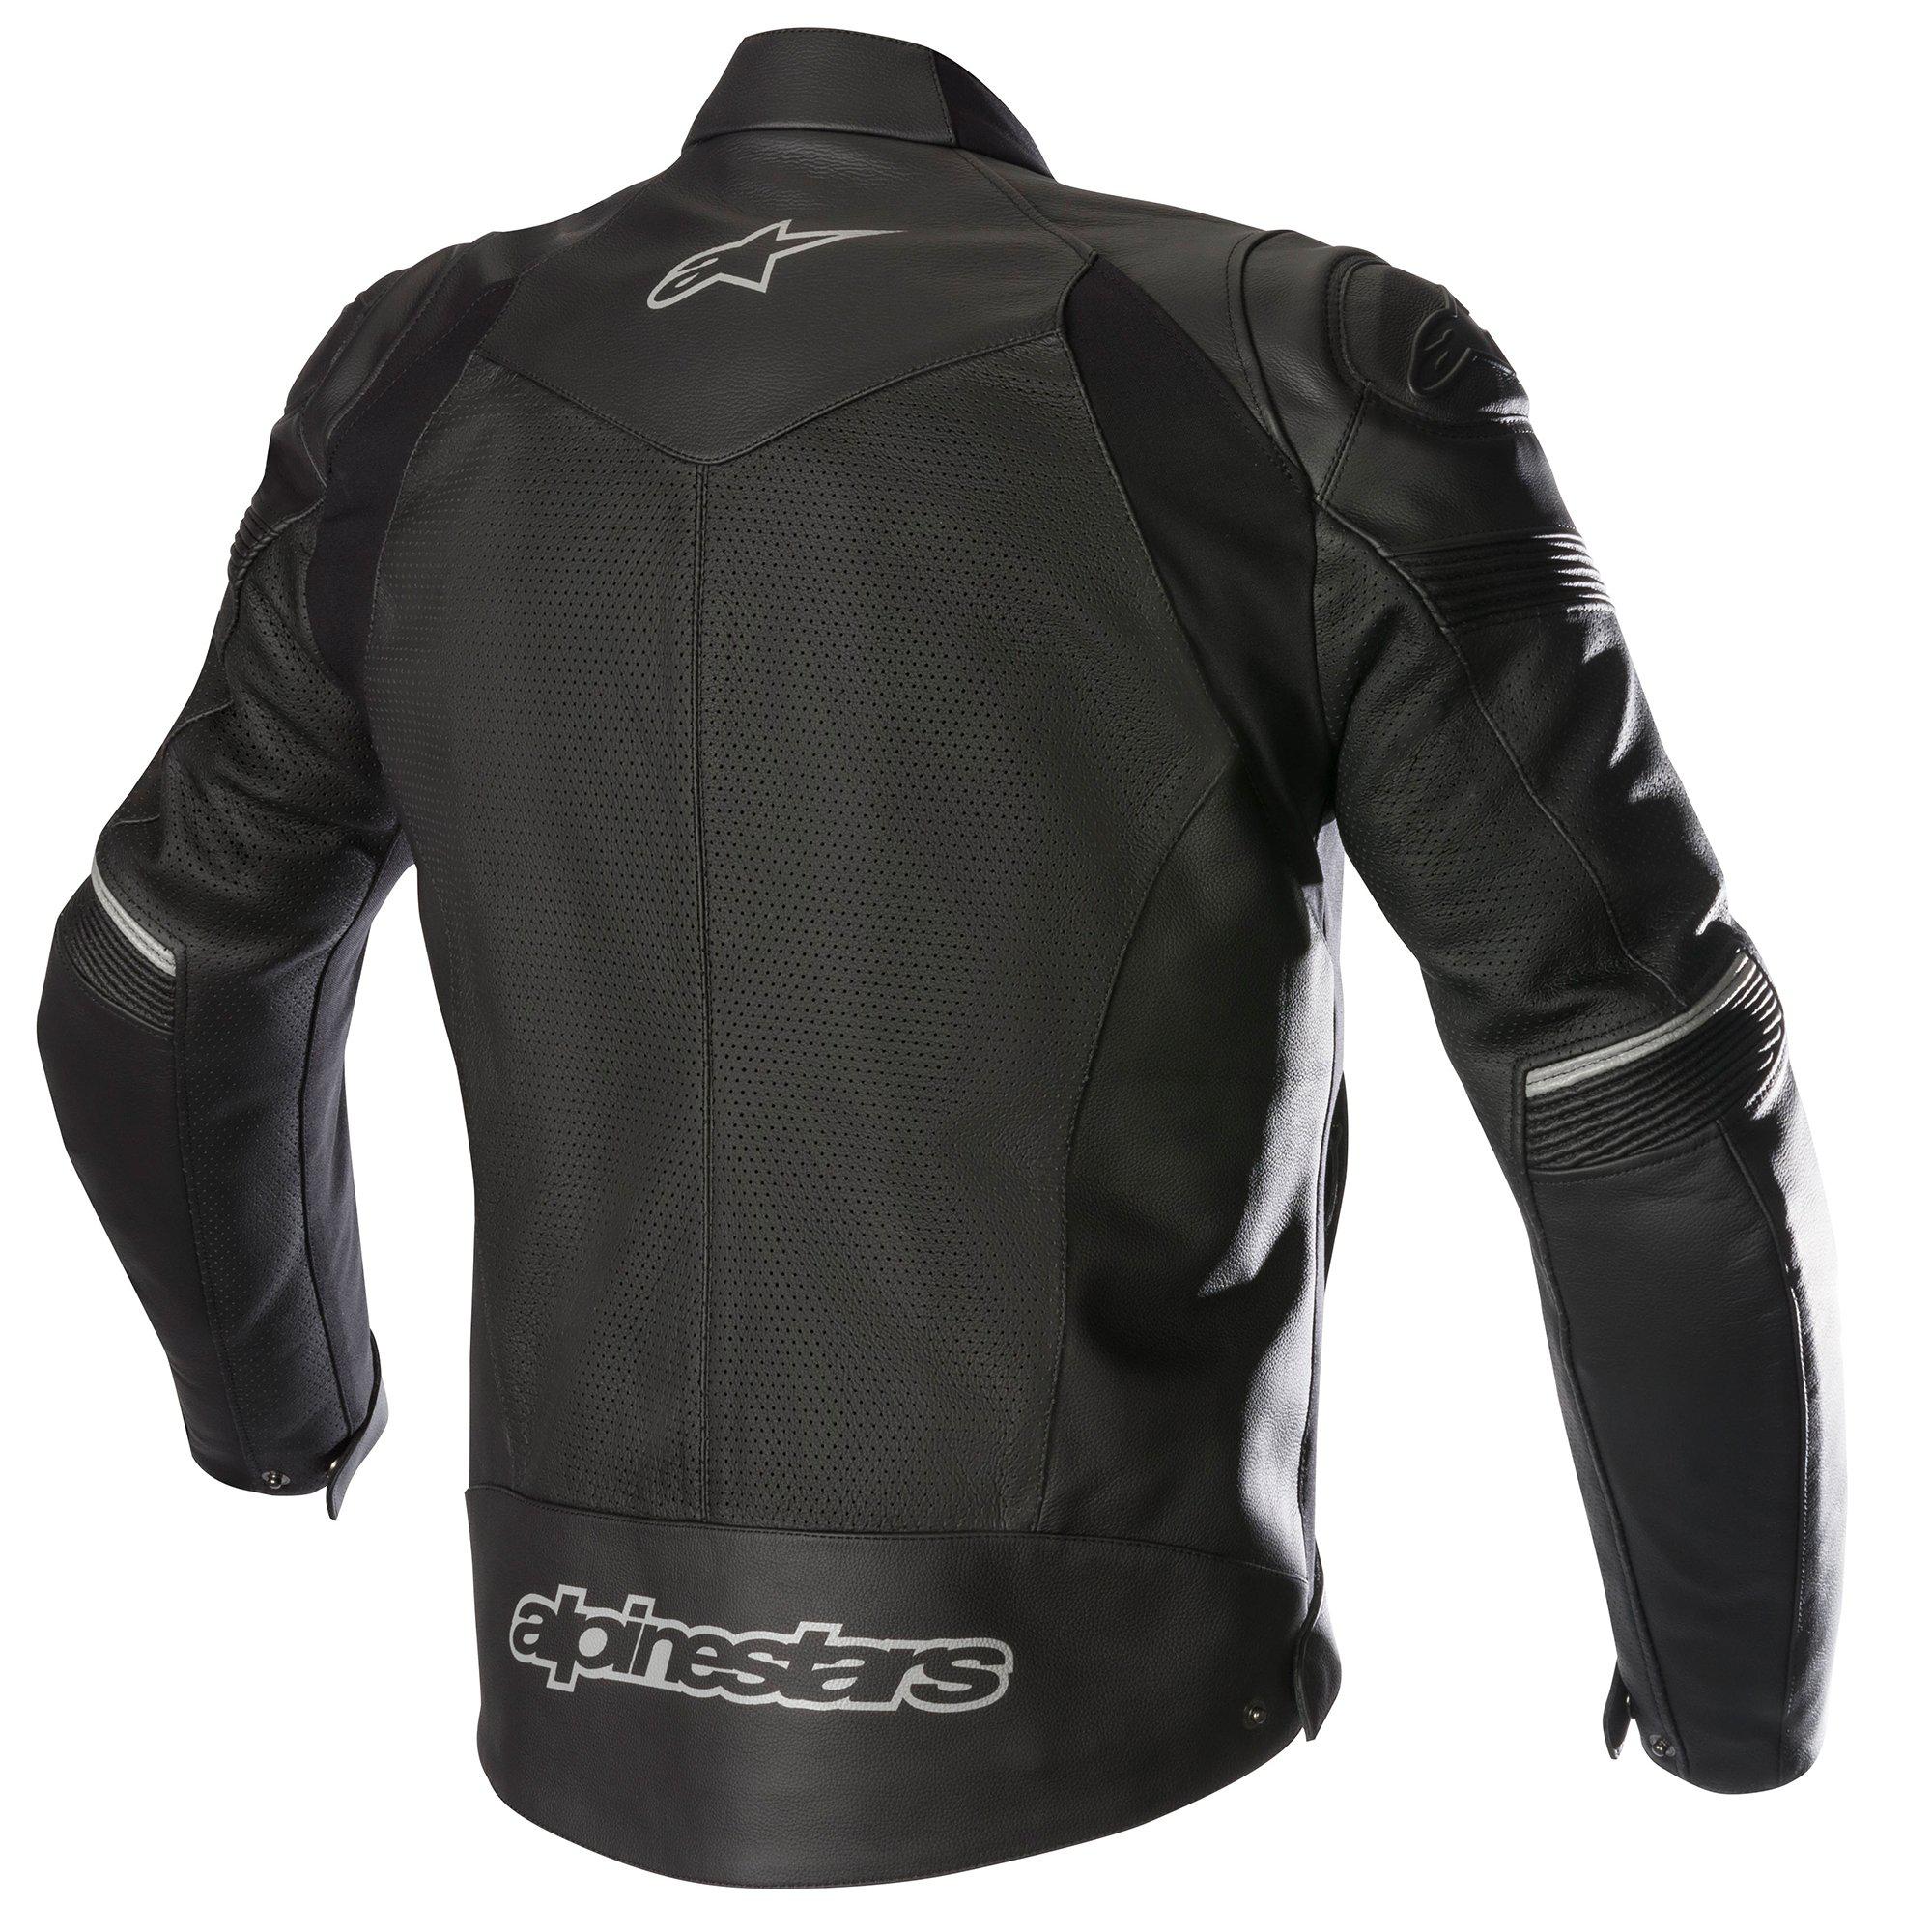 SP-1 Airflow Leather Jacket